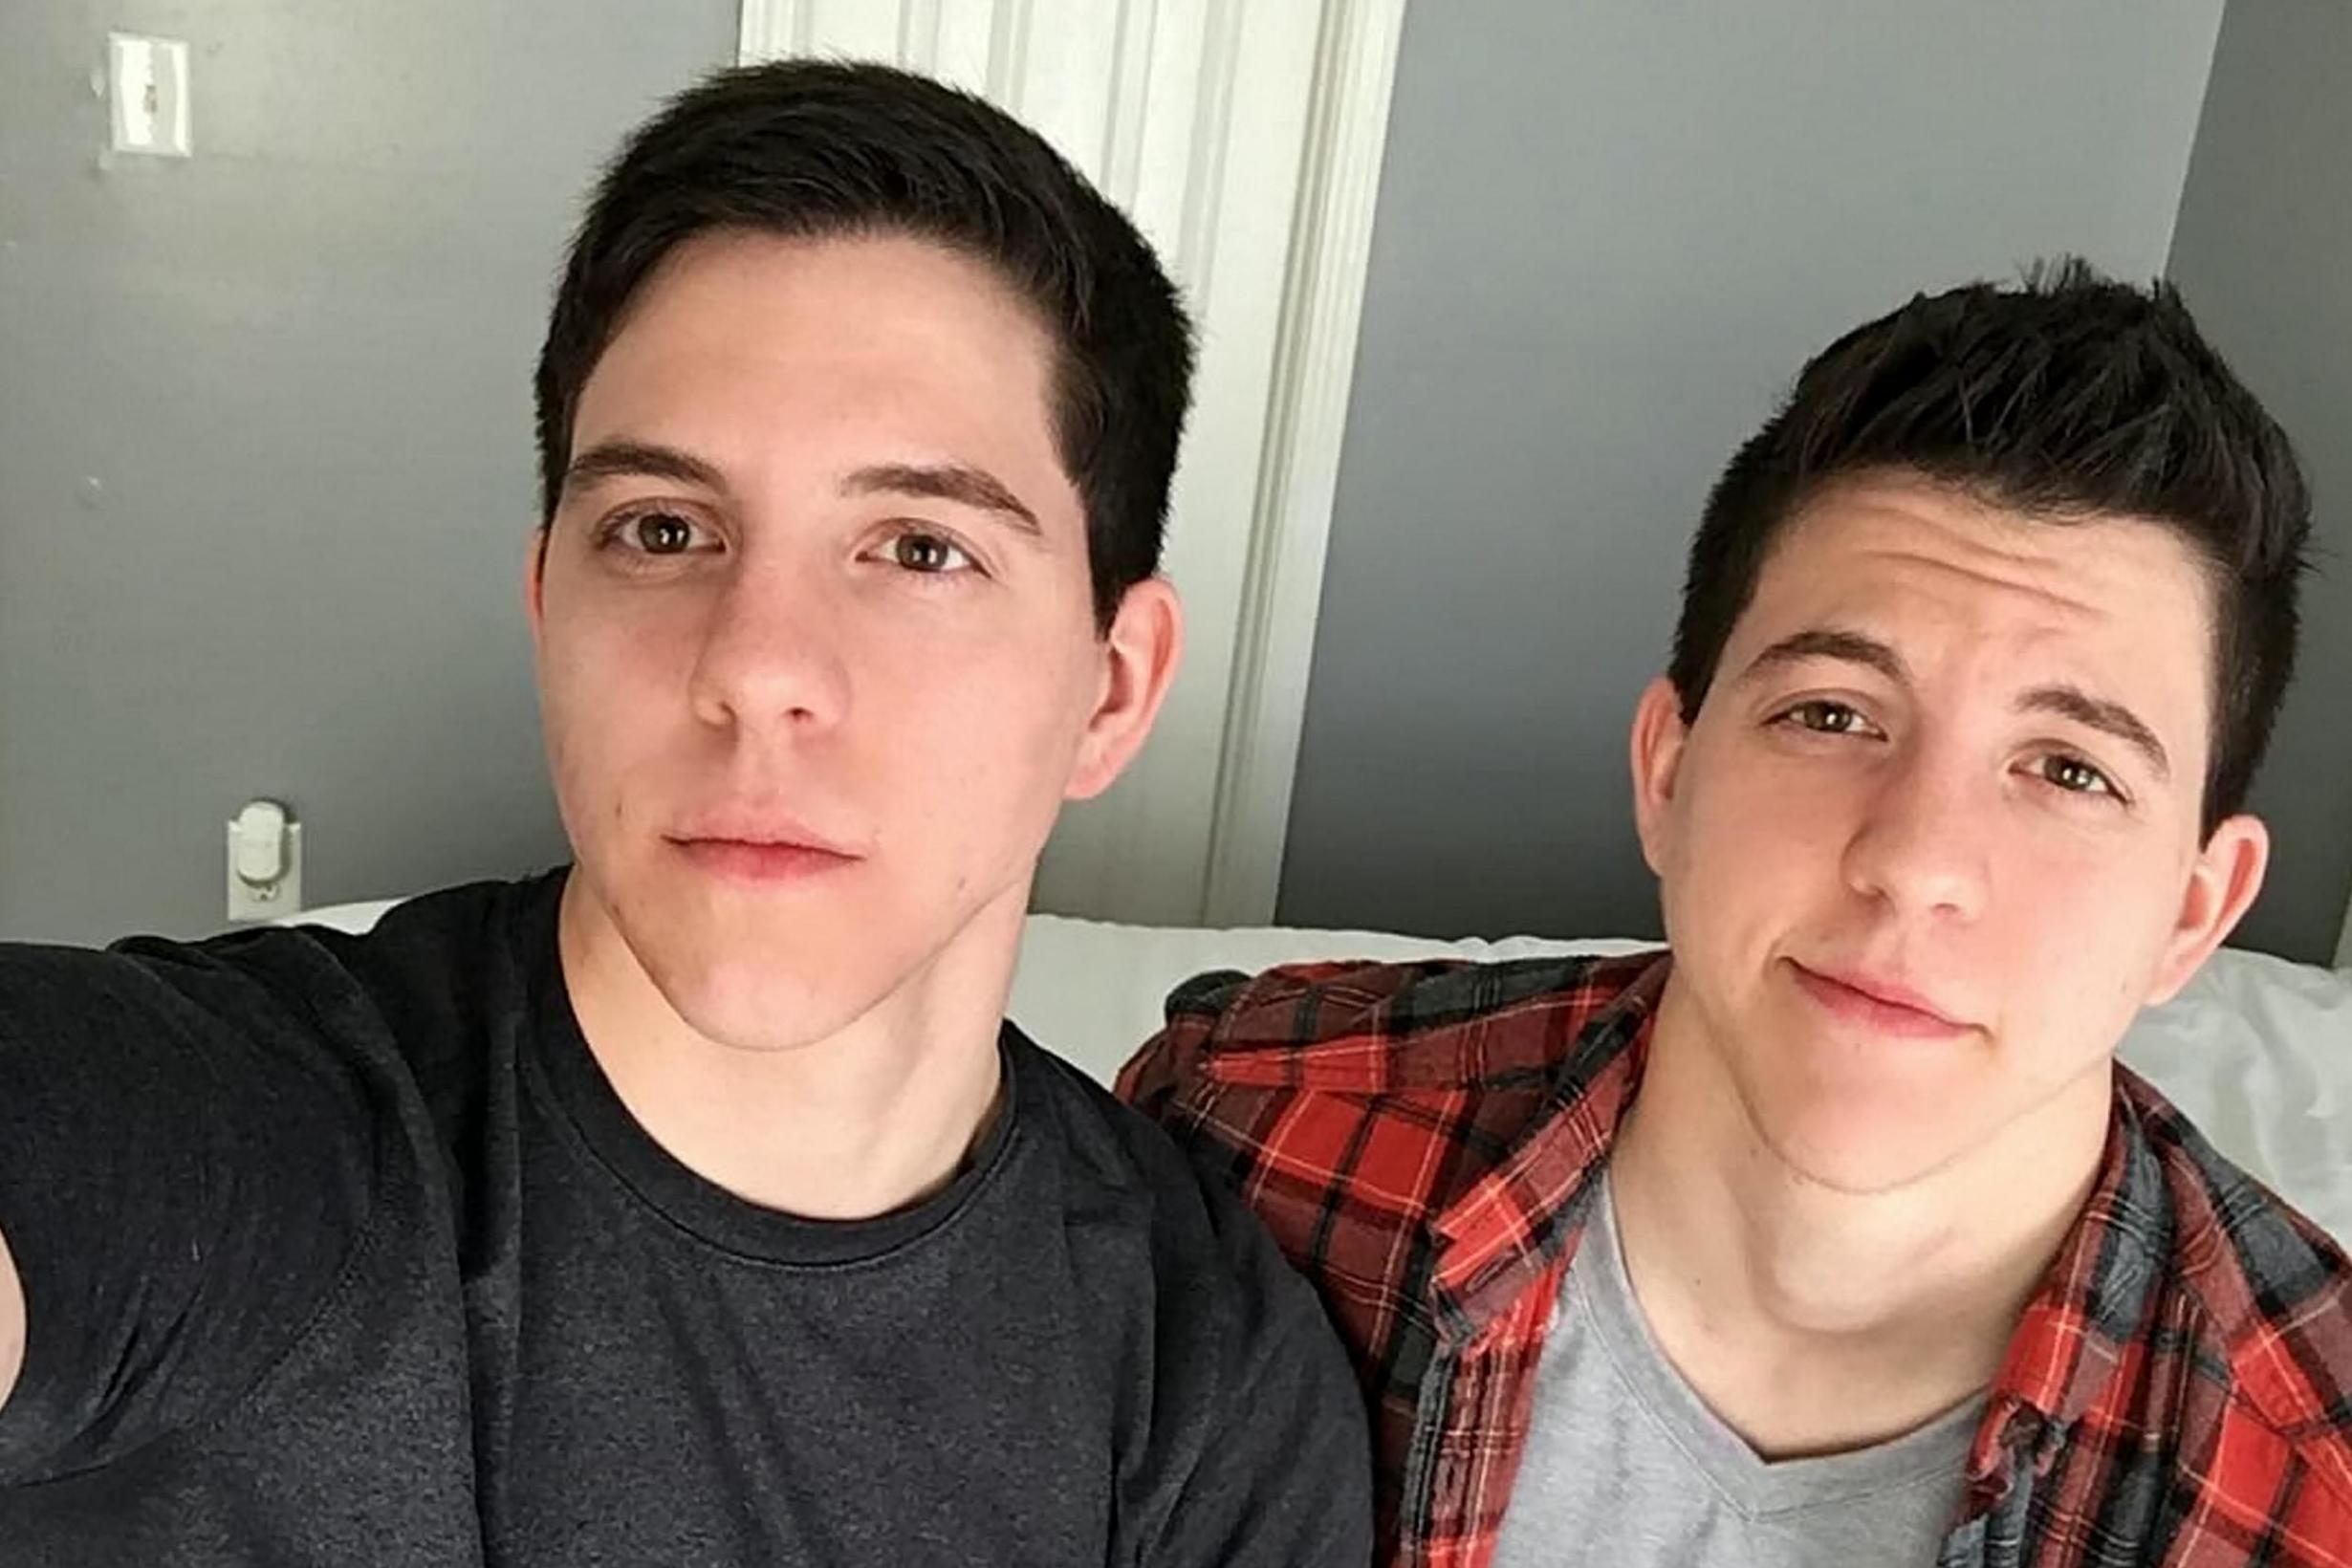 Identical twin girls transition into boys after both come ...